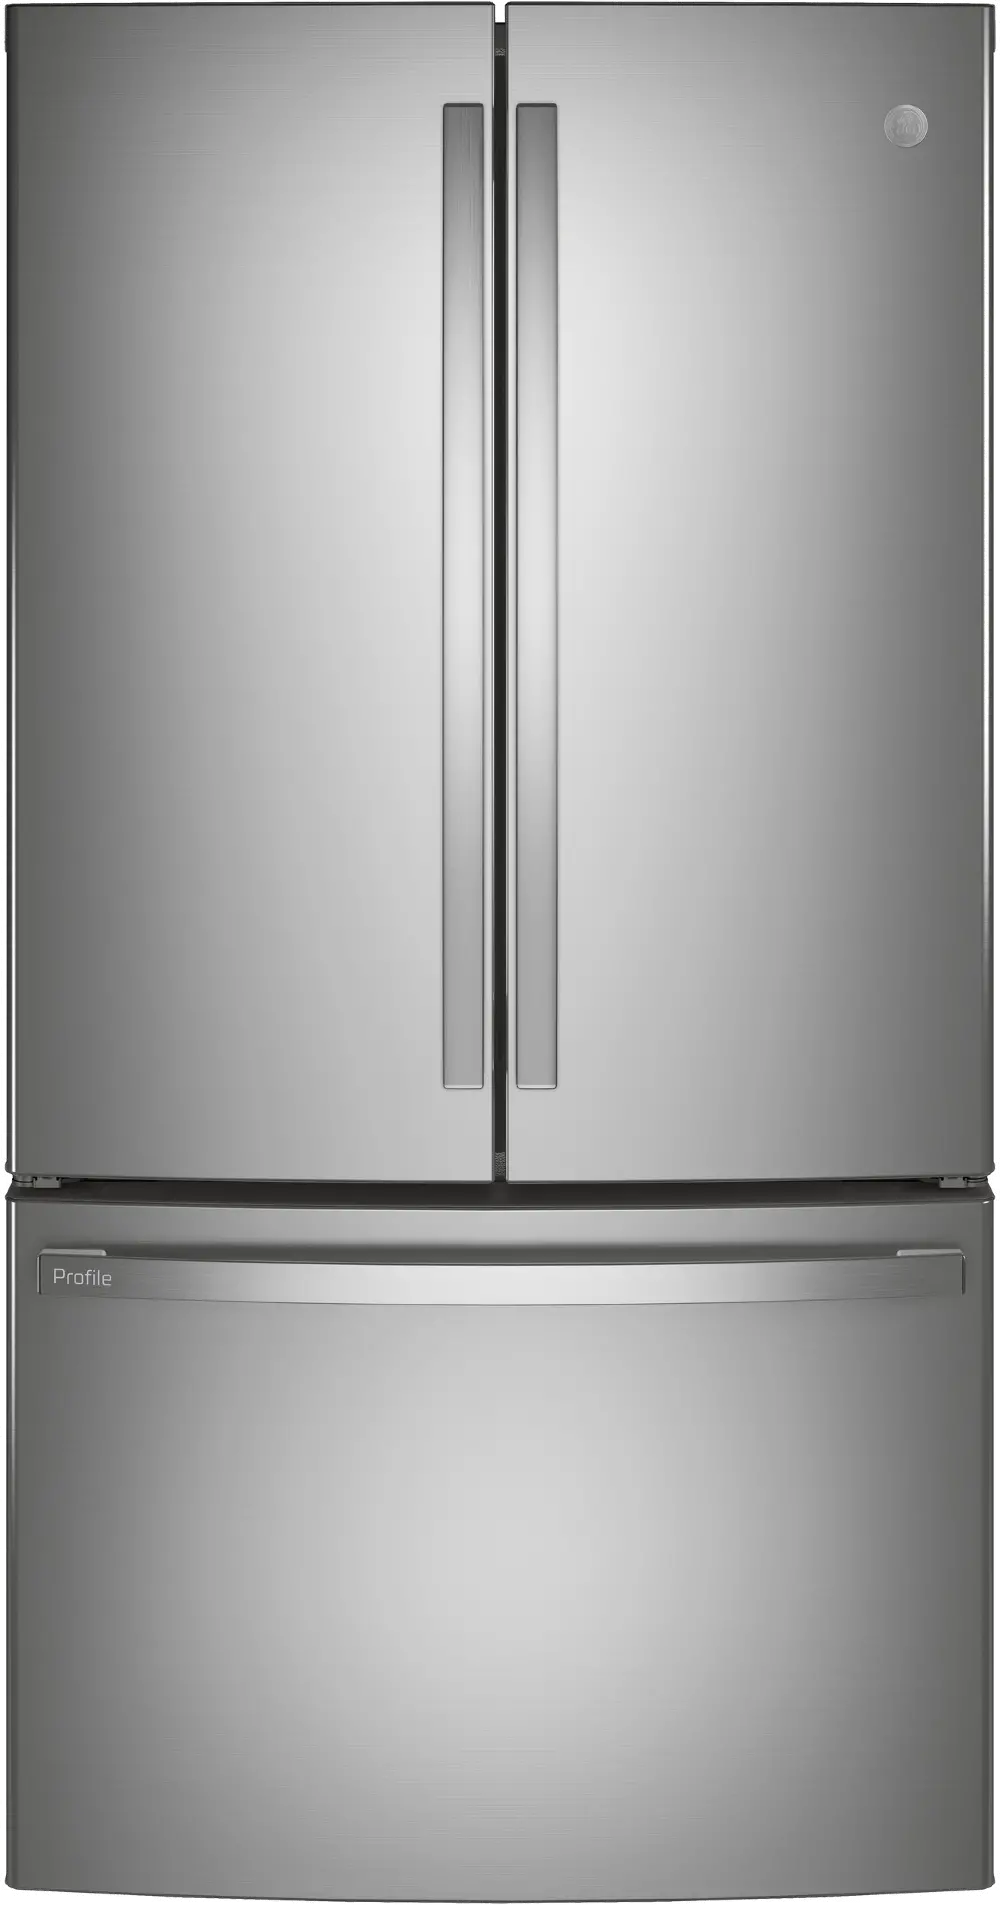 PWE23KYNFS GE Profile 23.1 cu ft French Door Refrigerator - Counter Depth Stainless Steel-1